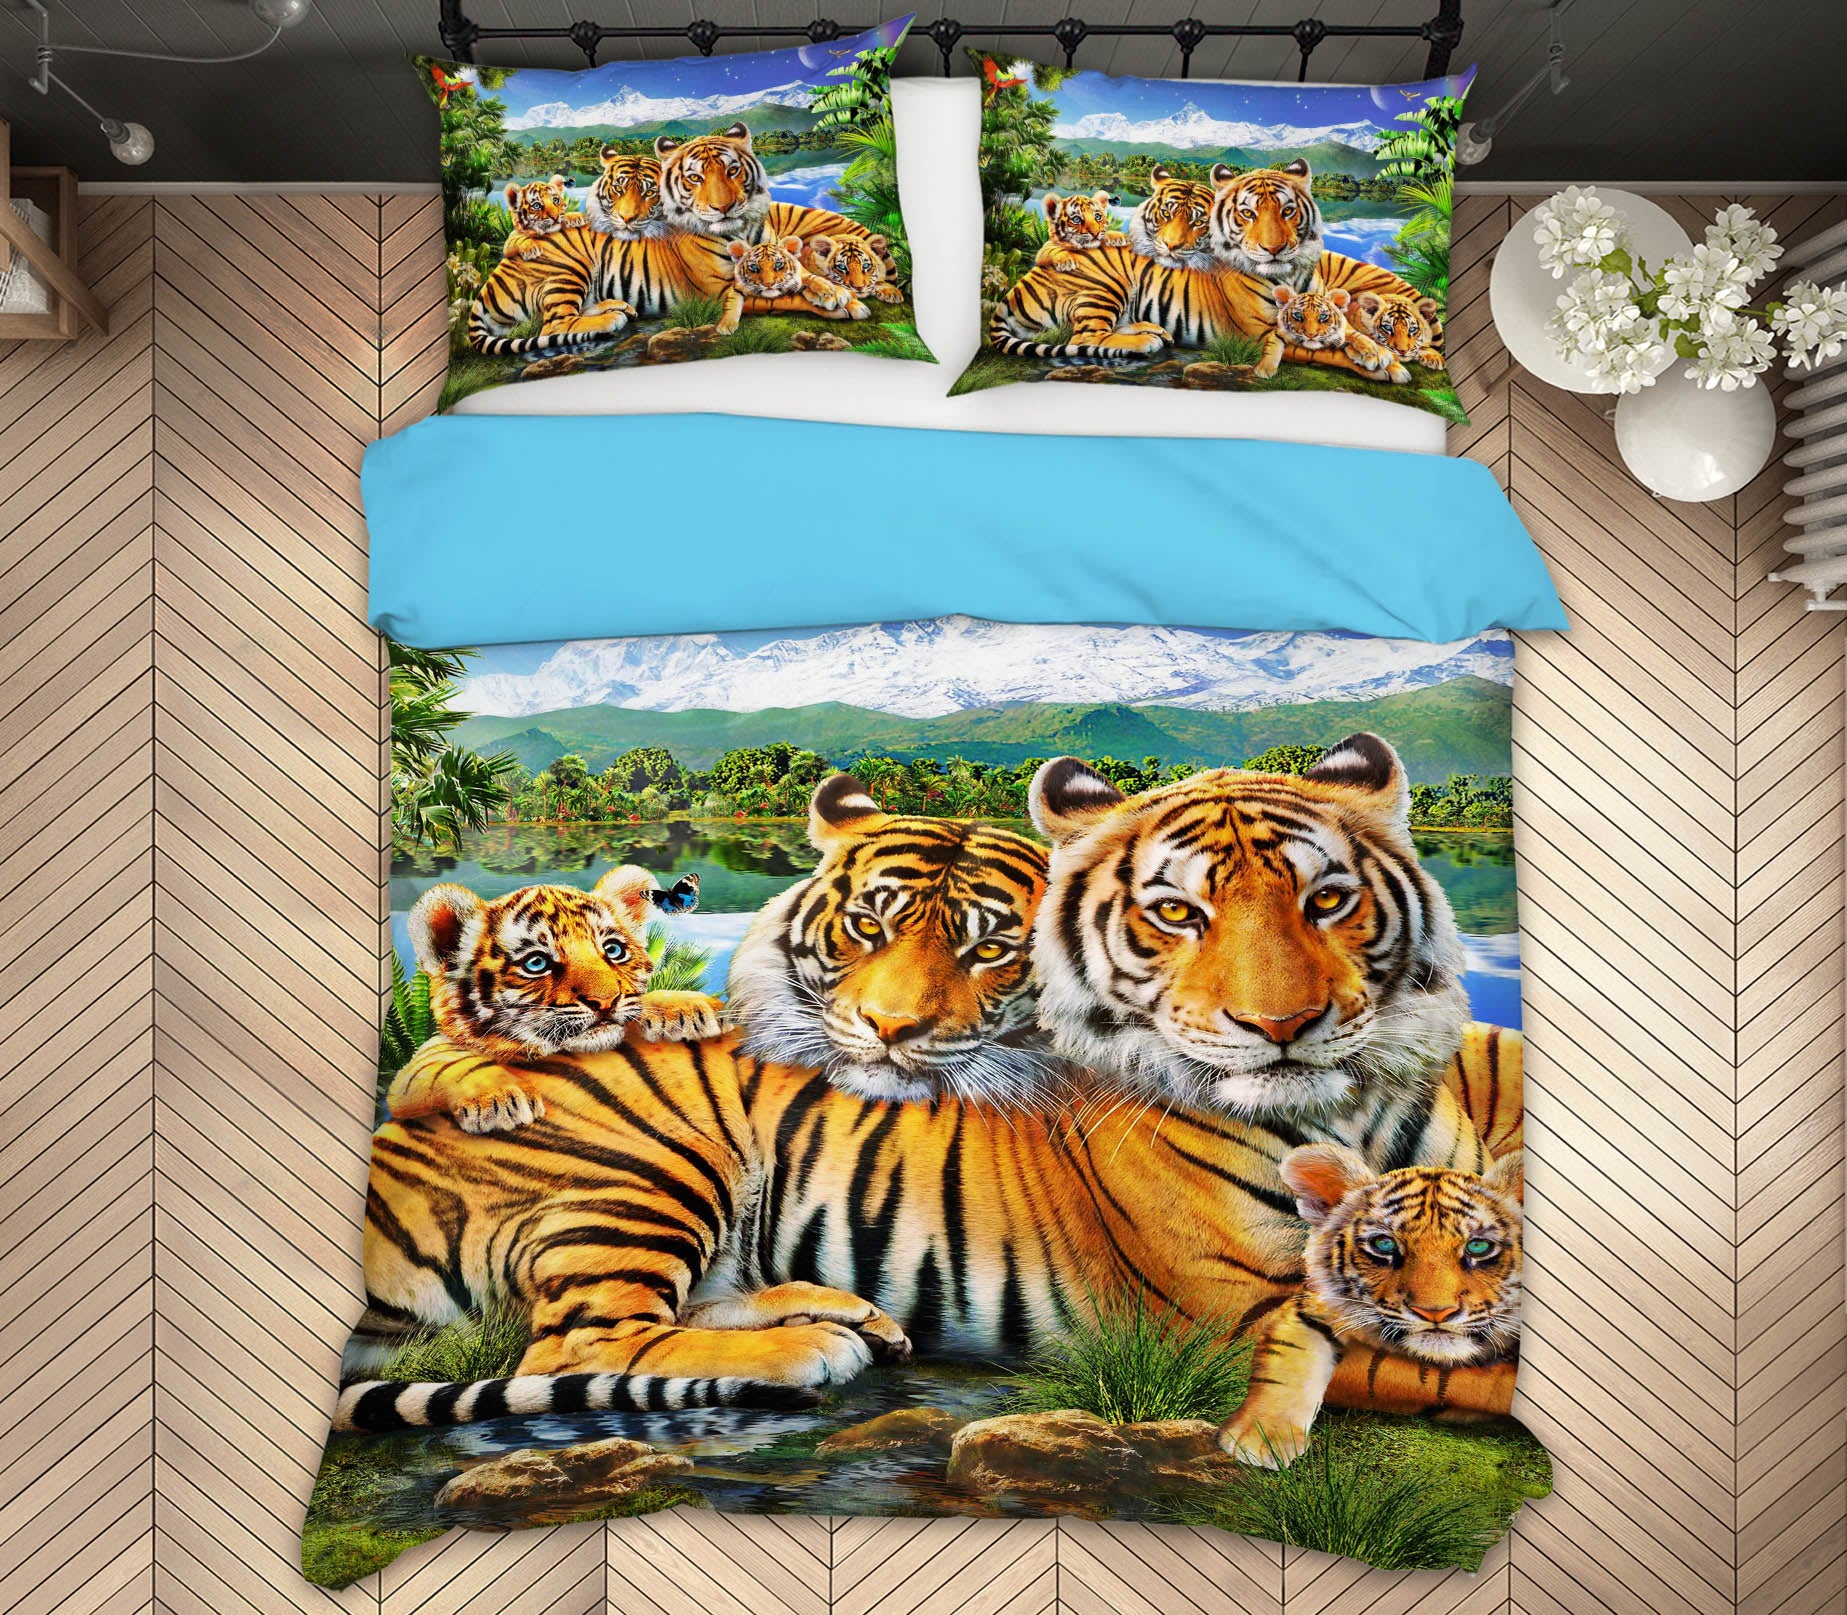 3D Loving Tigers 2121 Adrian Chesterman Bedding Bed Pillowcases Quilt